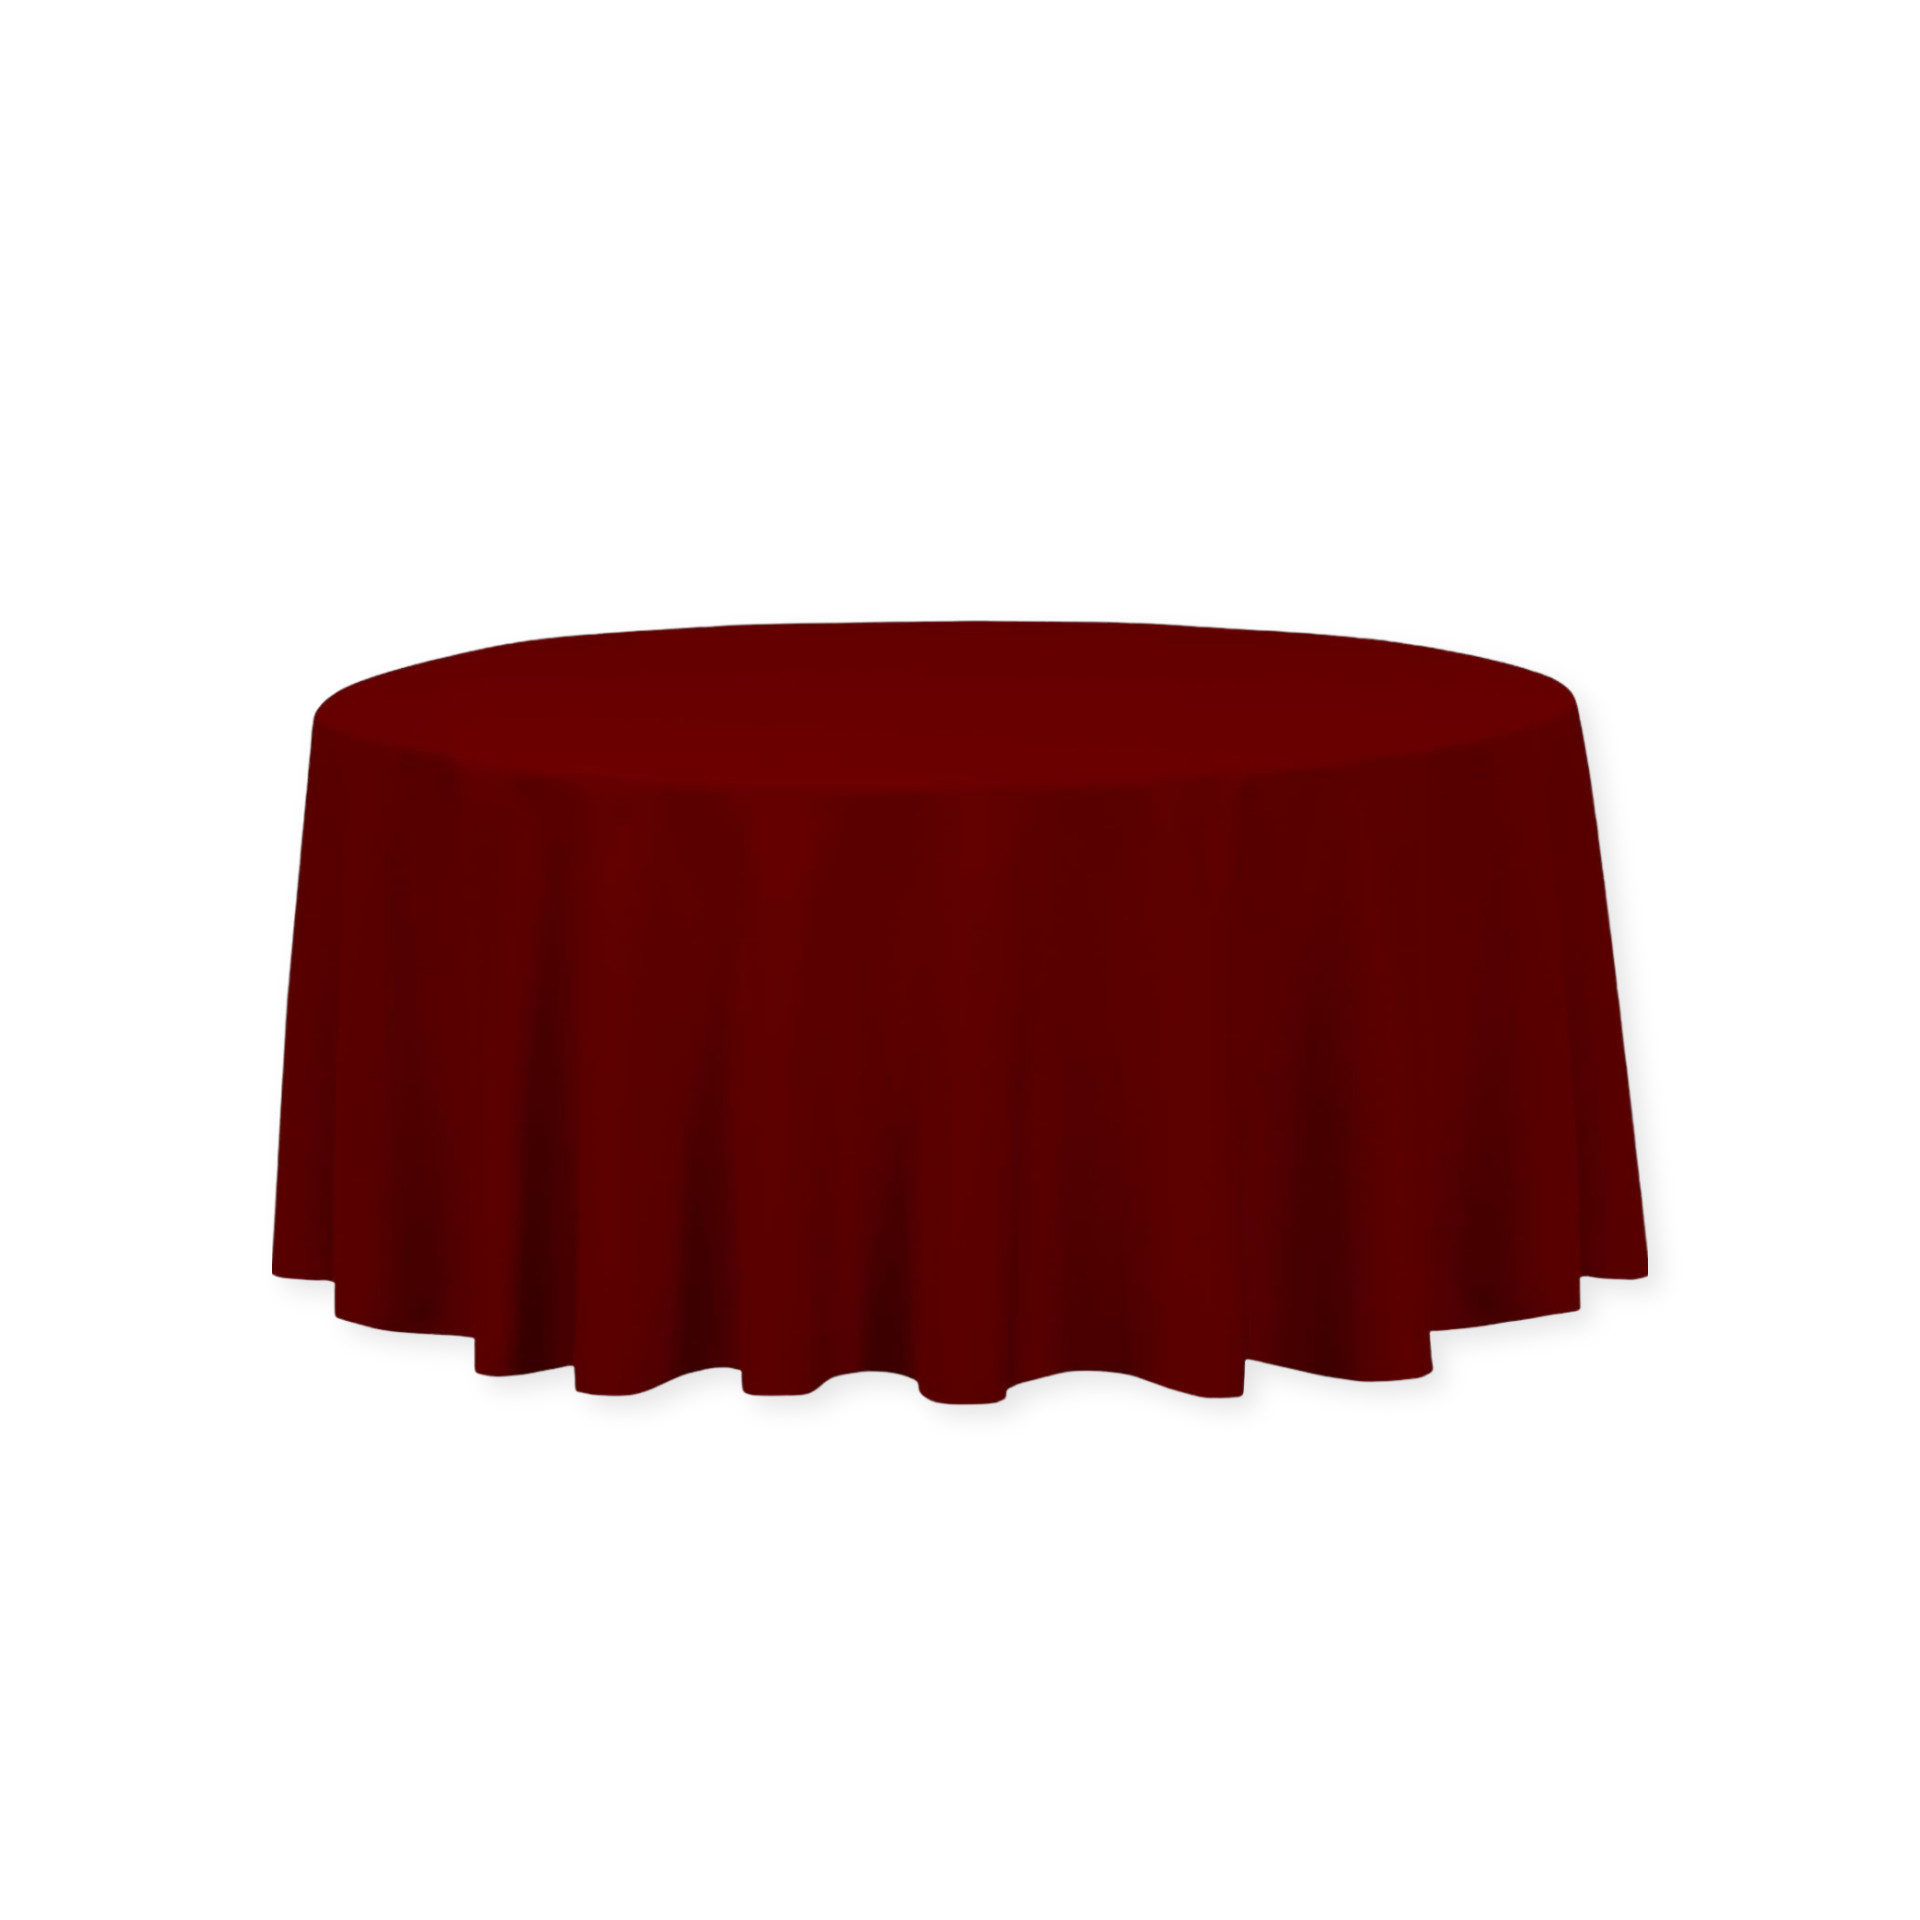 Tablecloth polyester round burgundy  commercial grade wedding party event rental panama city beach